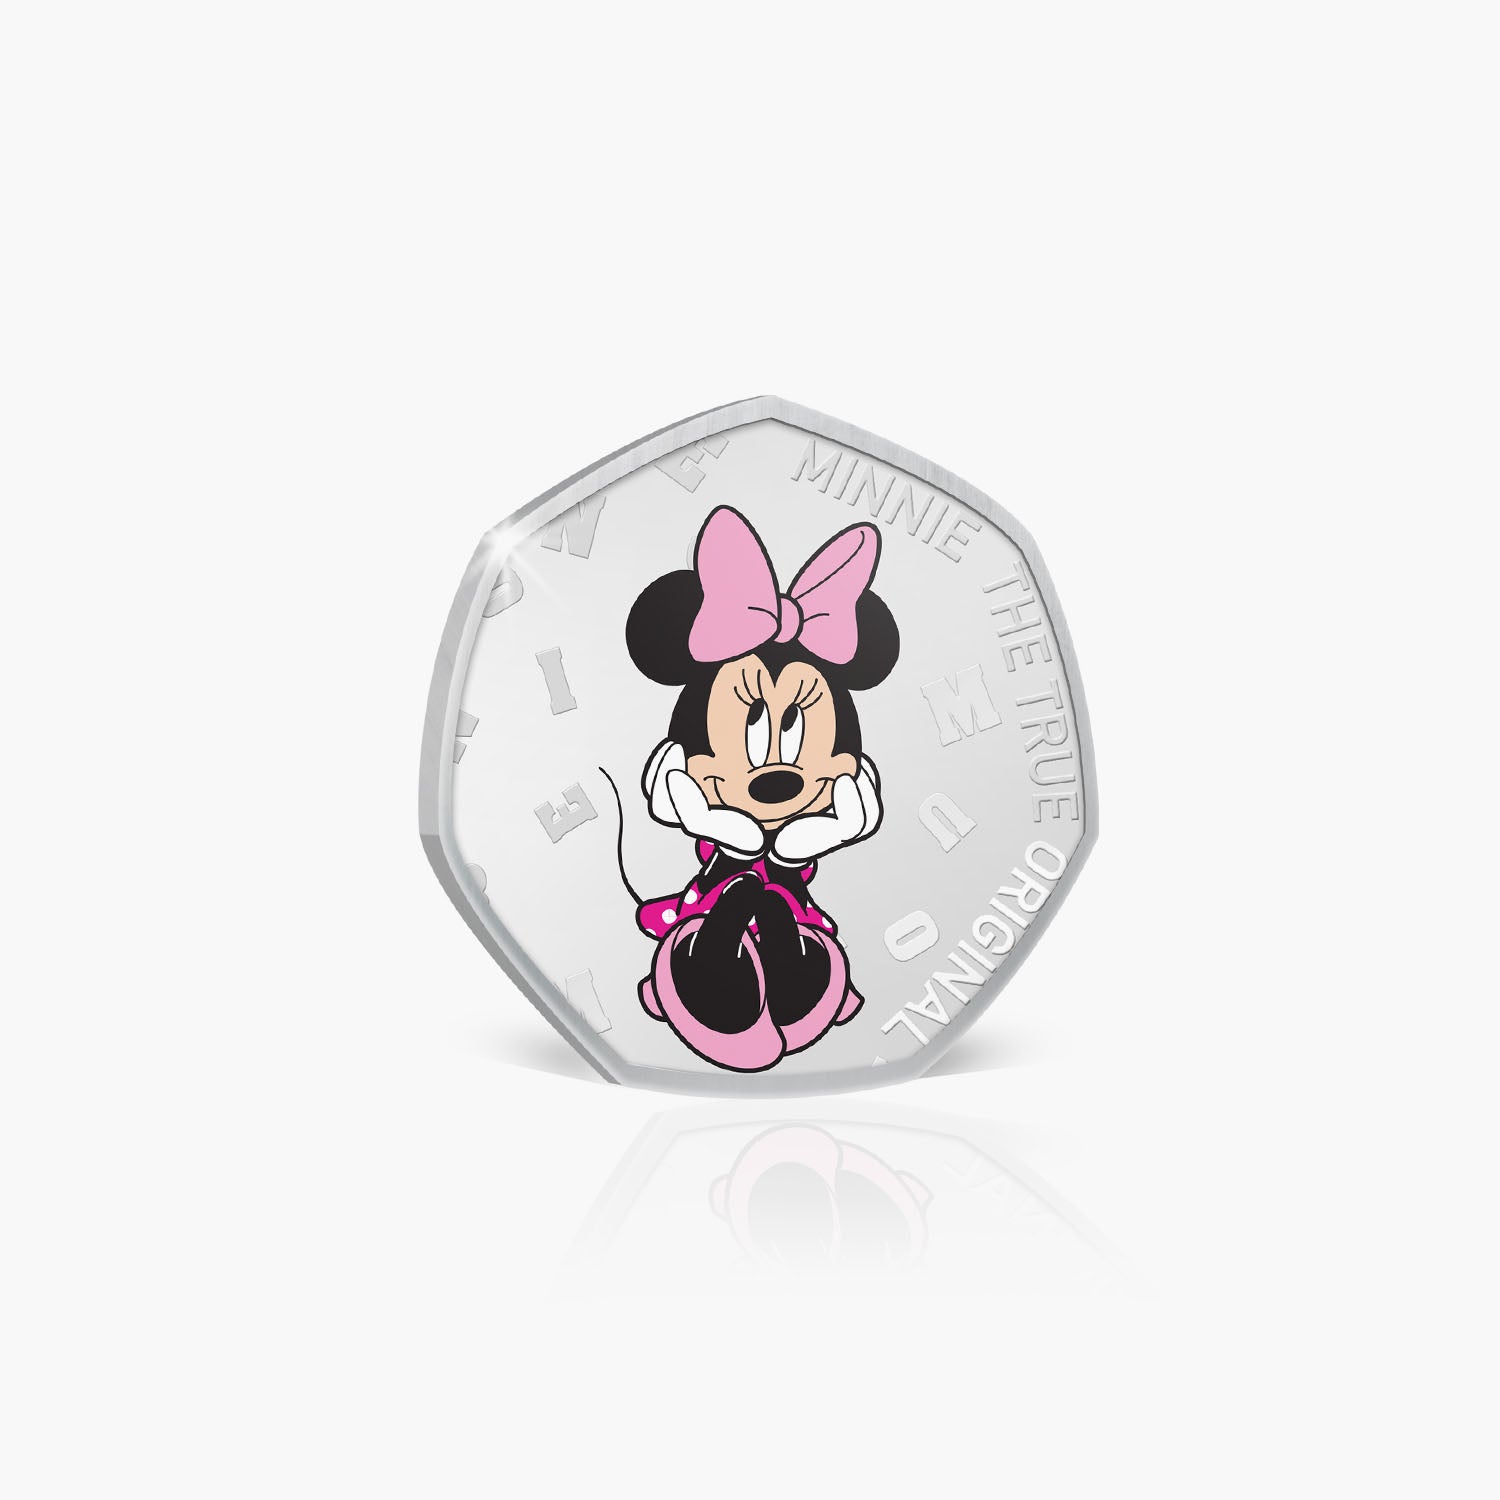 Pink Minnie Silver-Plated Commemorative